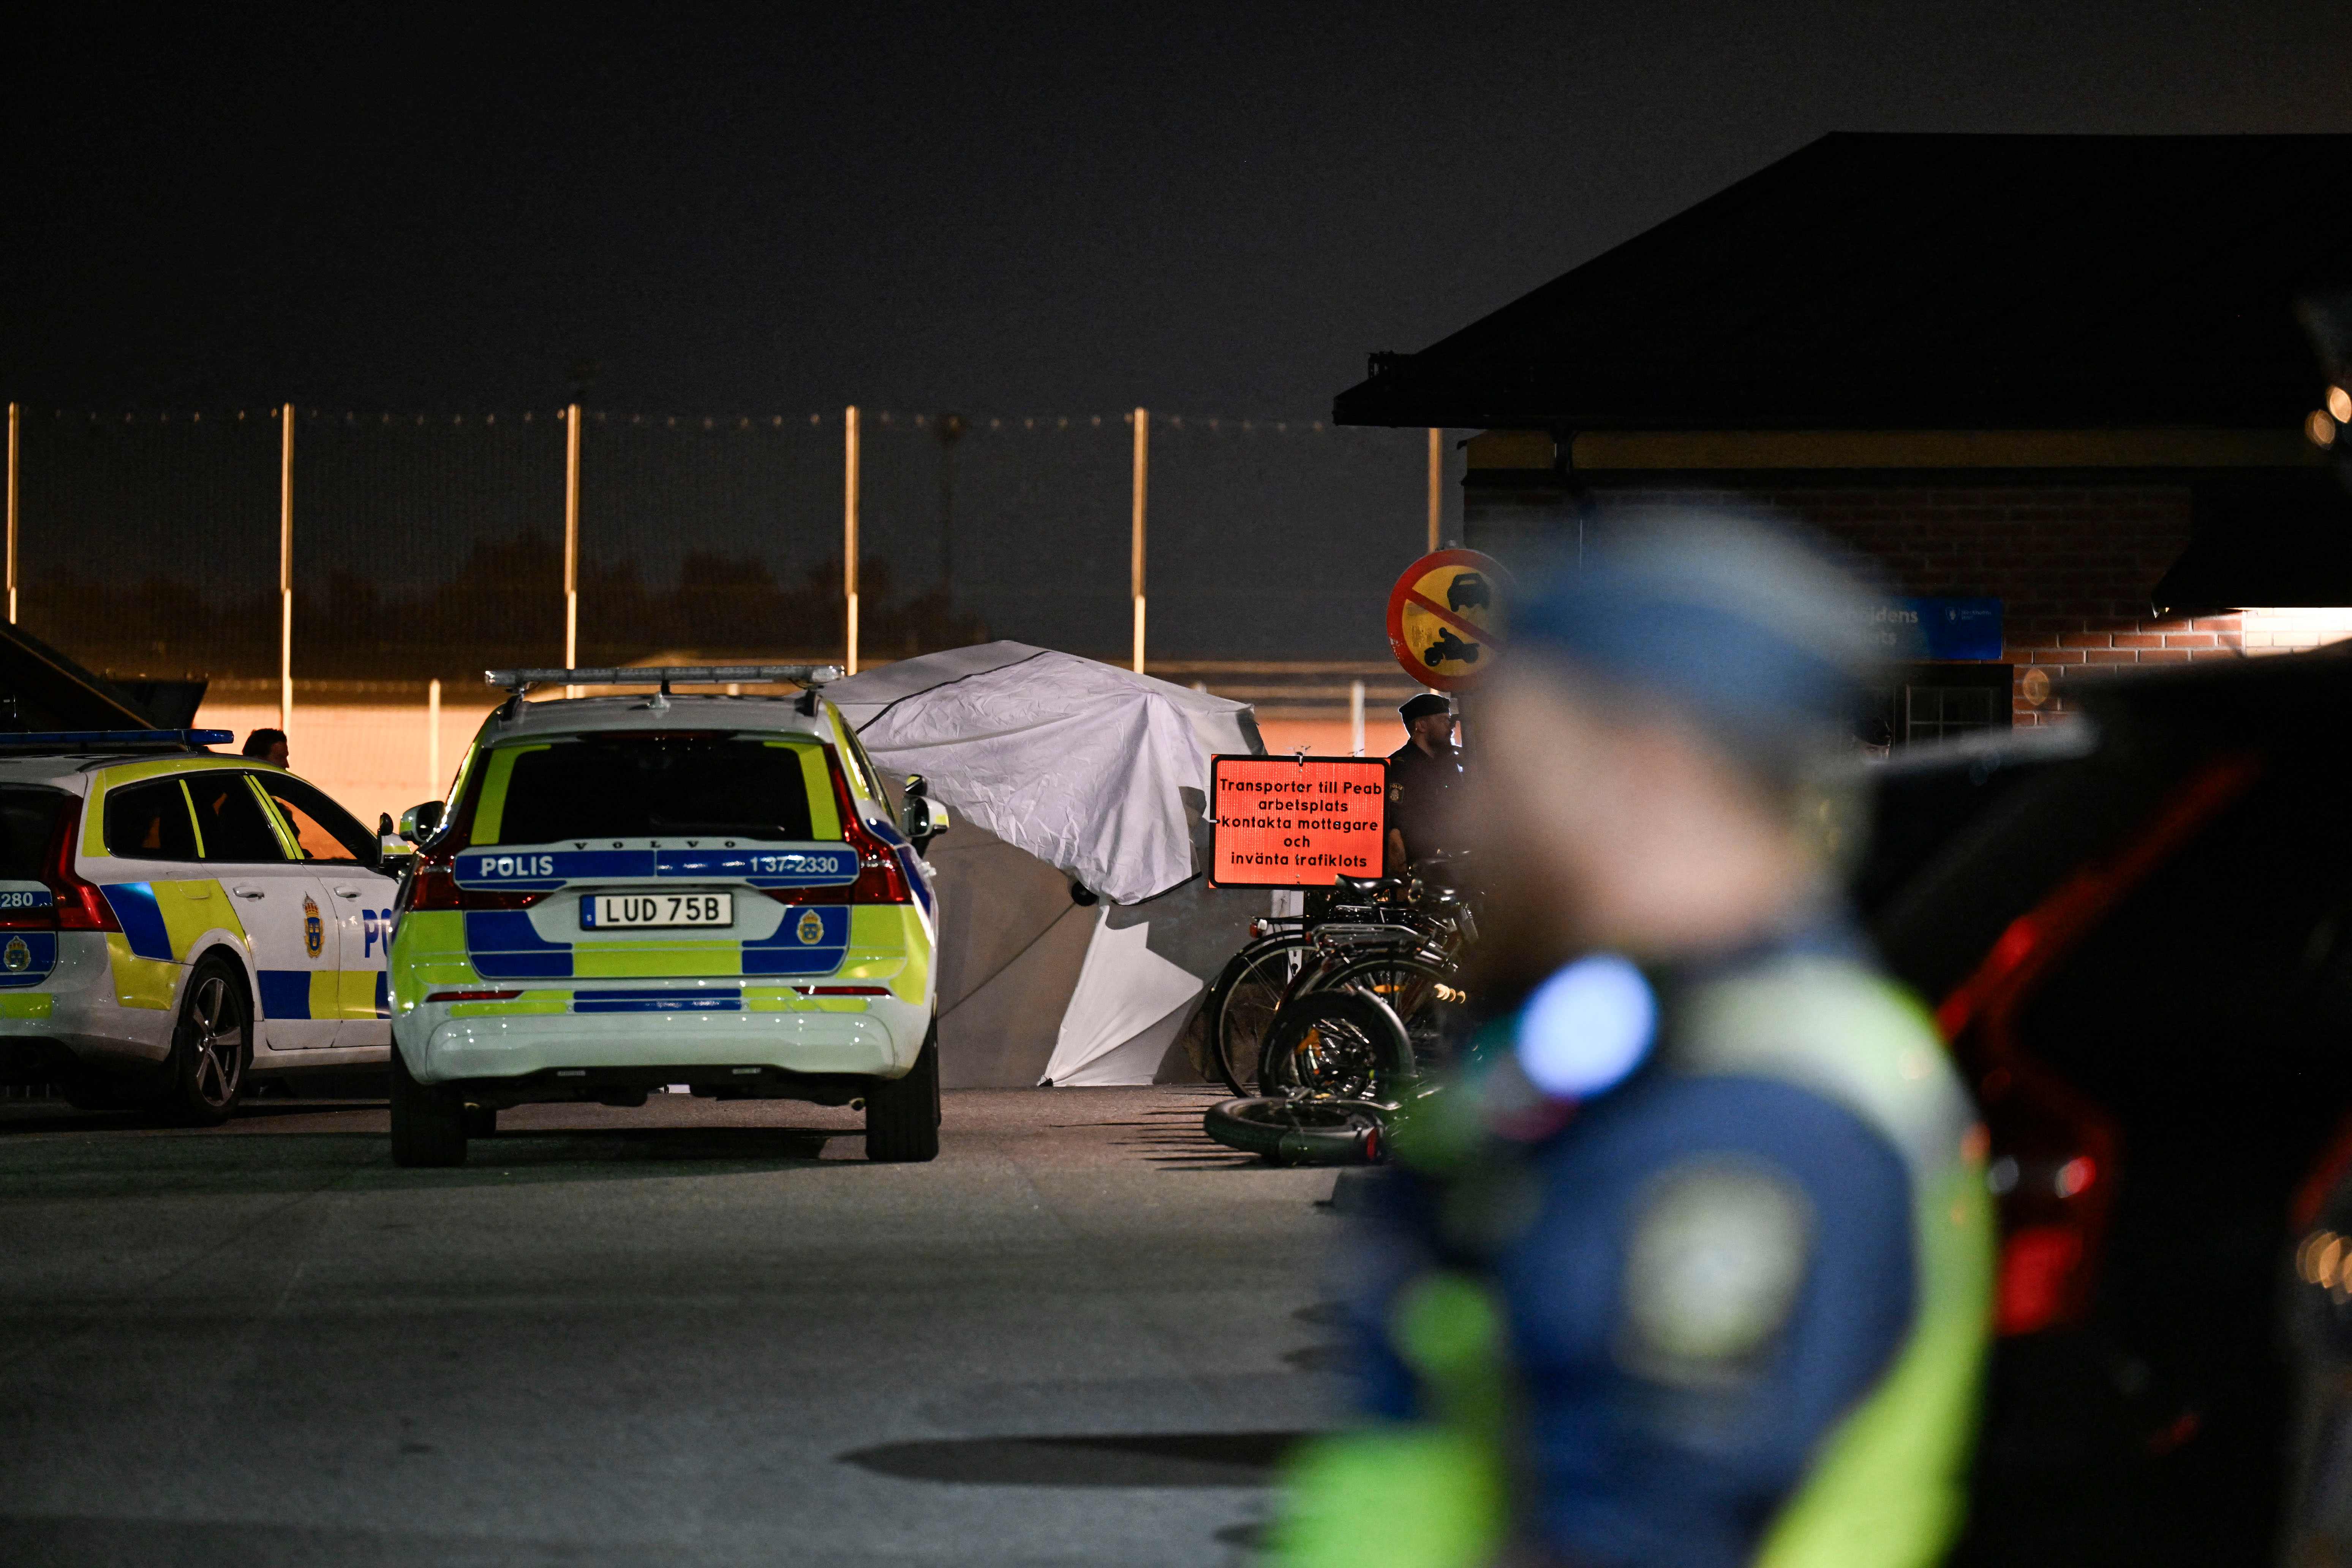 Police patrol at the scene after a shooting in Jordbro, Sweden